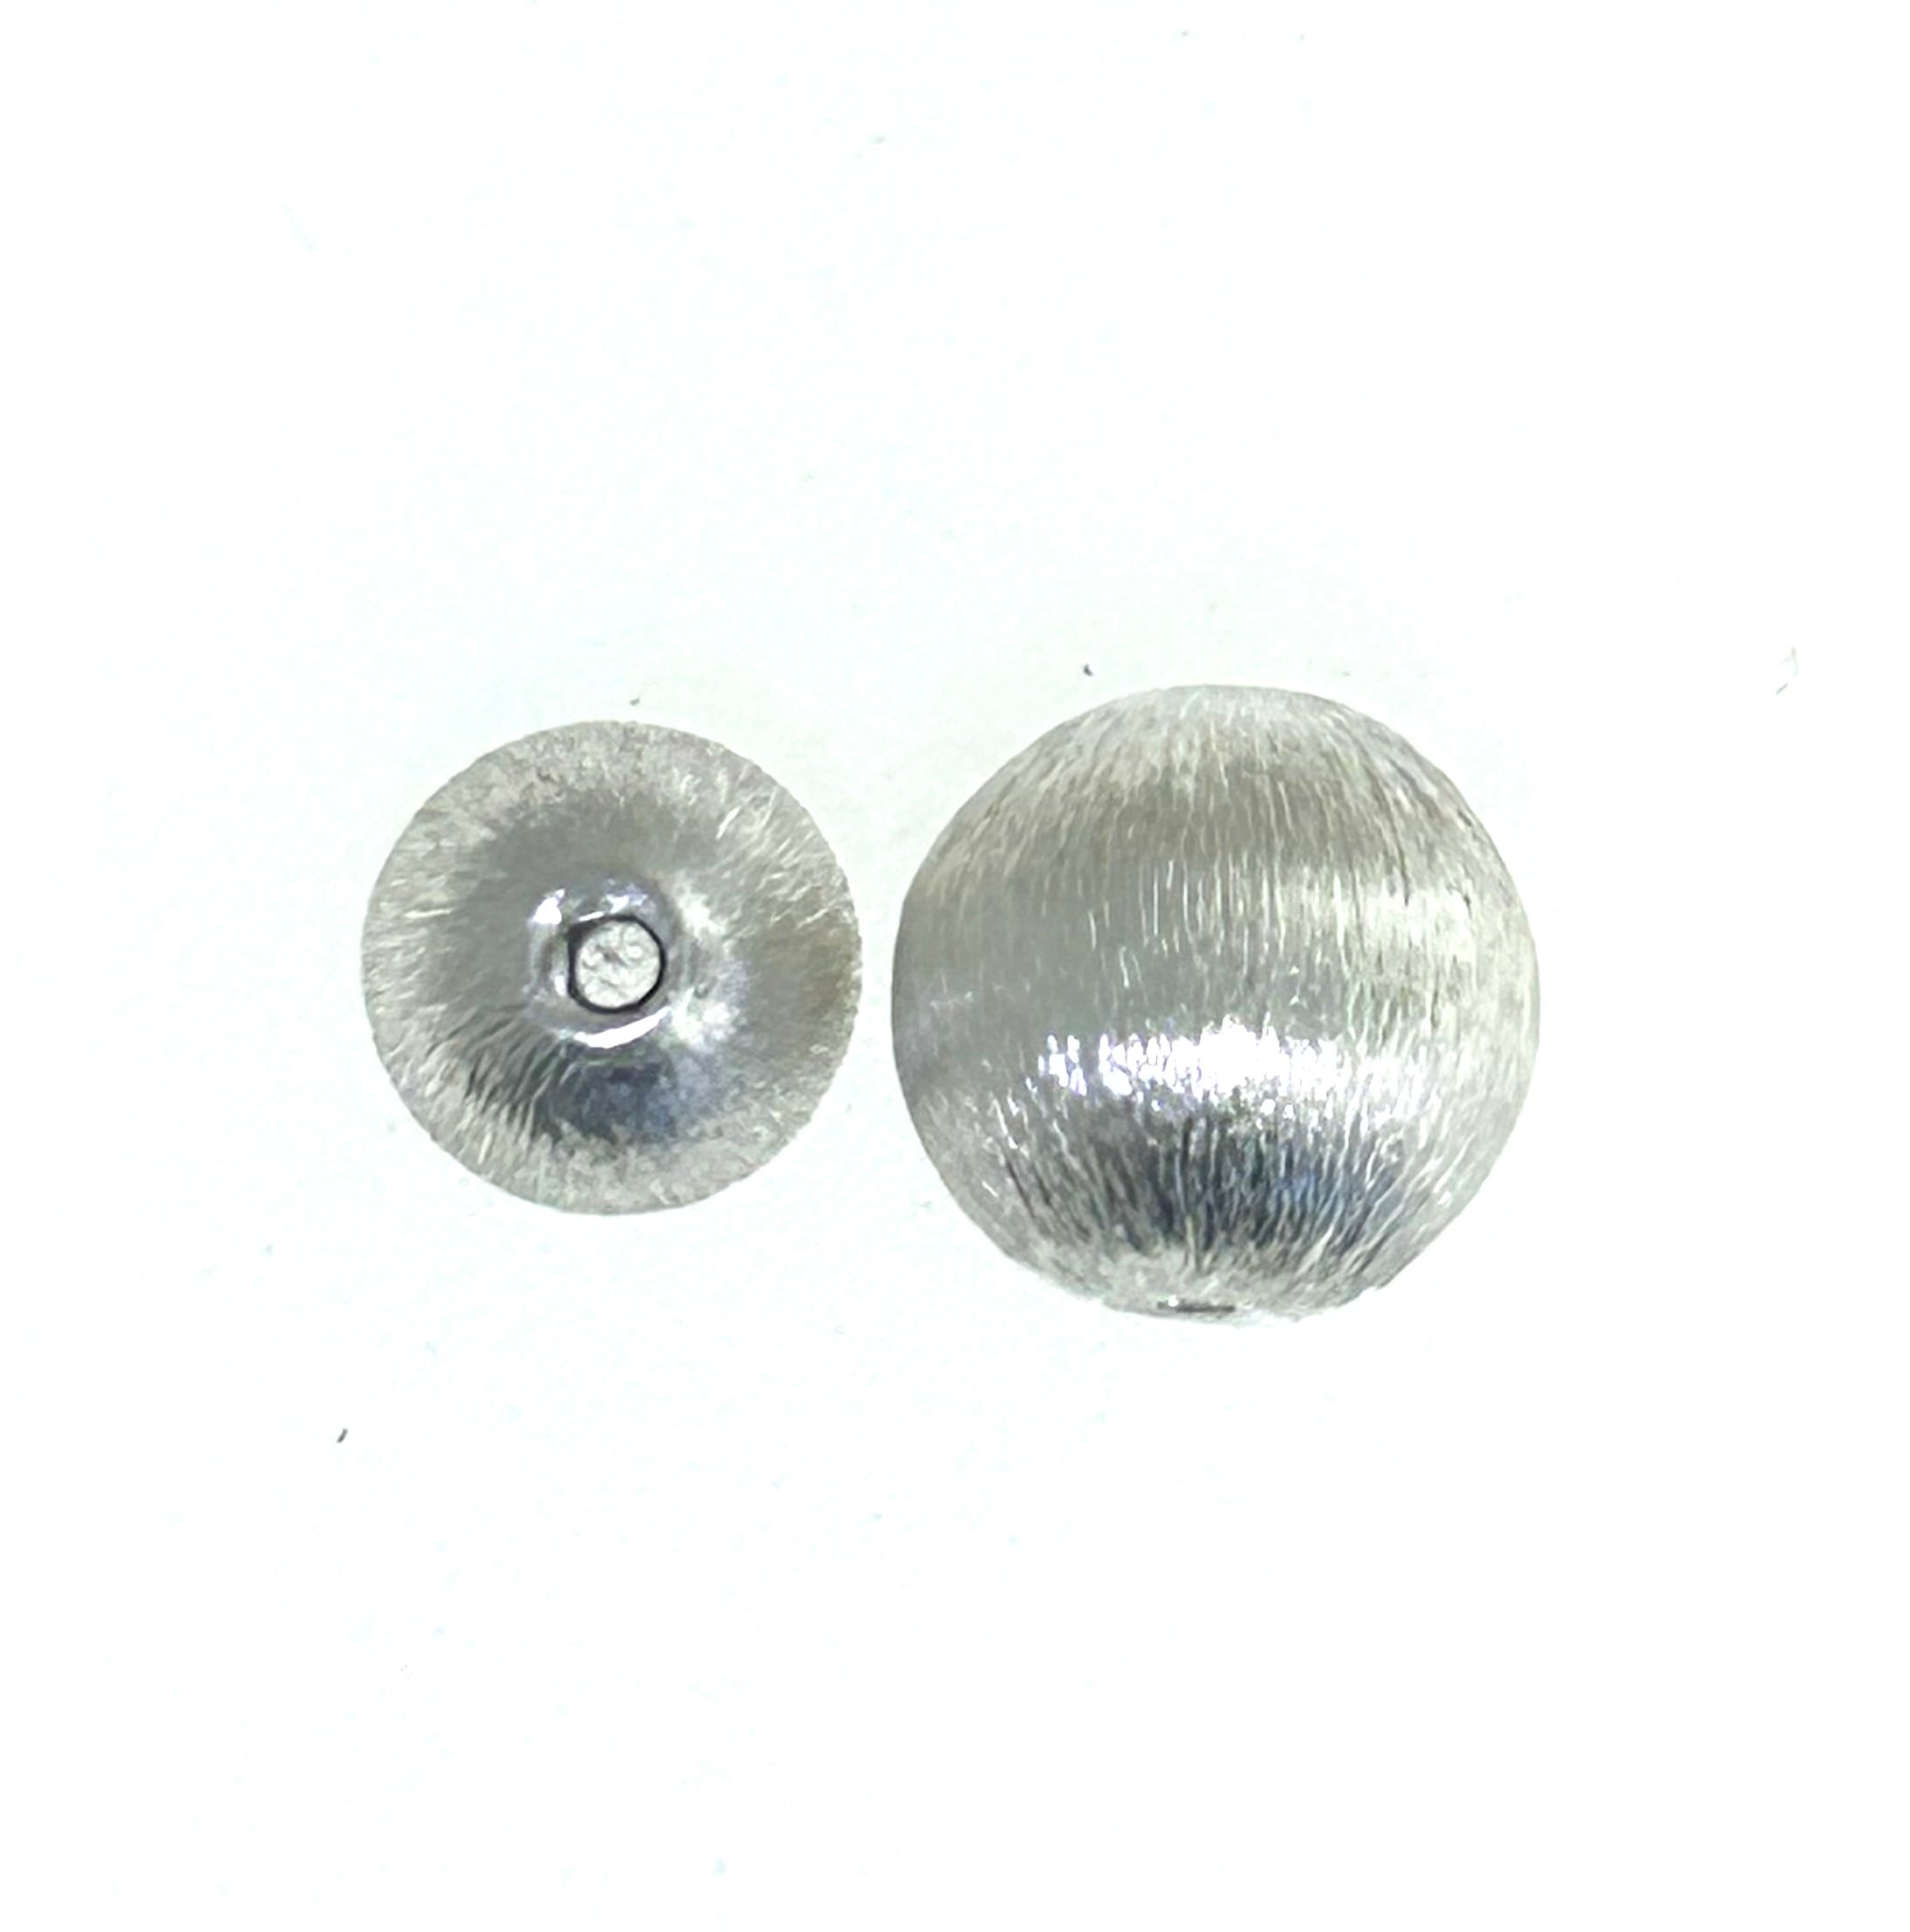 HB14-Hill Tribe Silver Brushed Bead. 2 sizes available